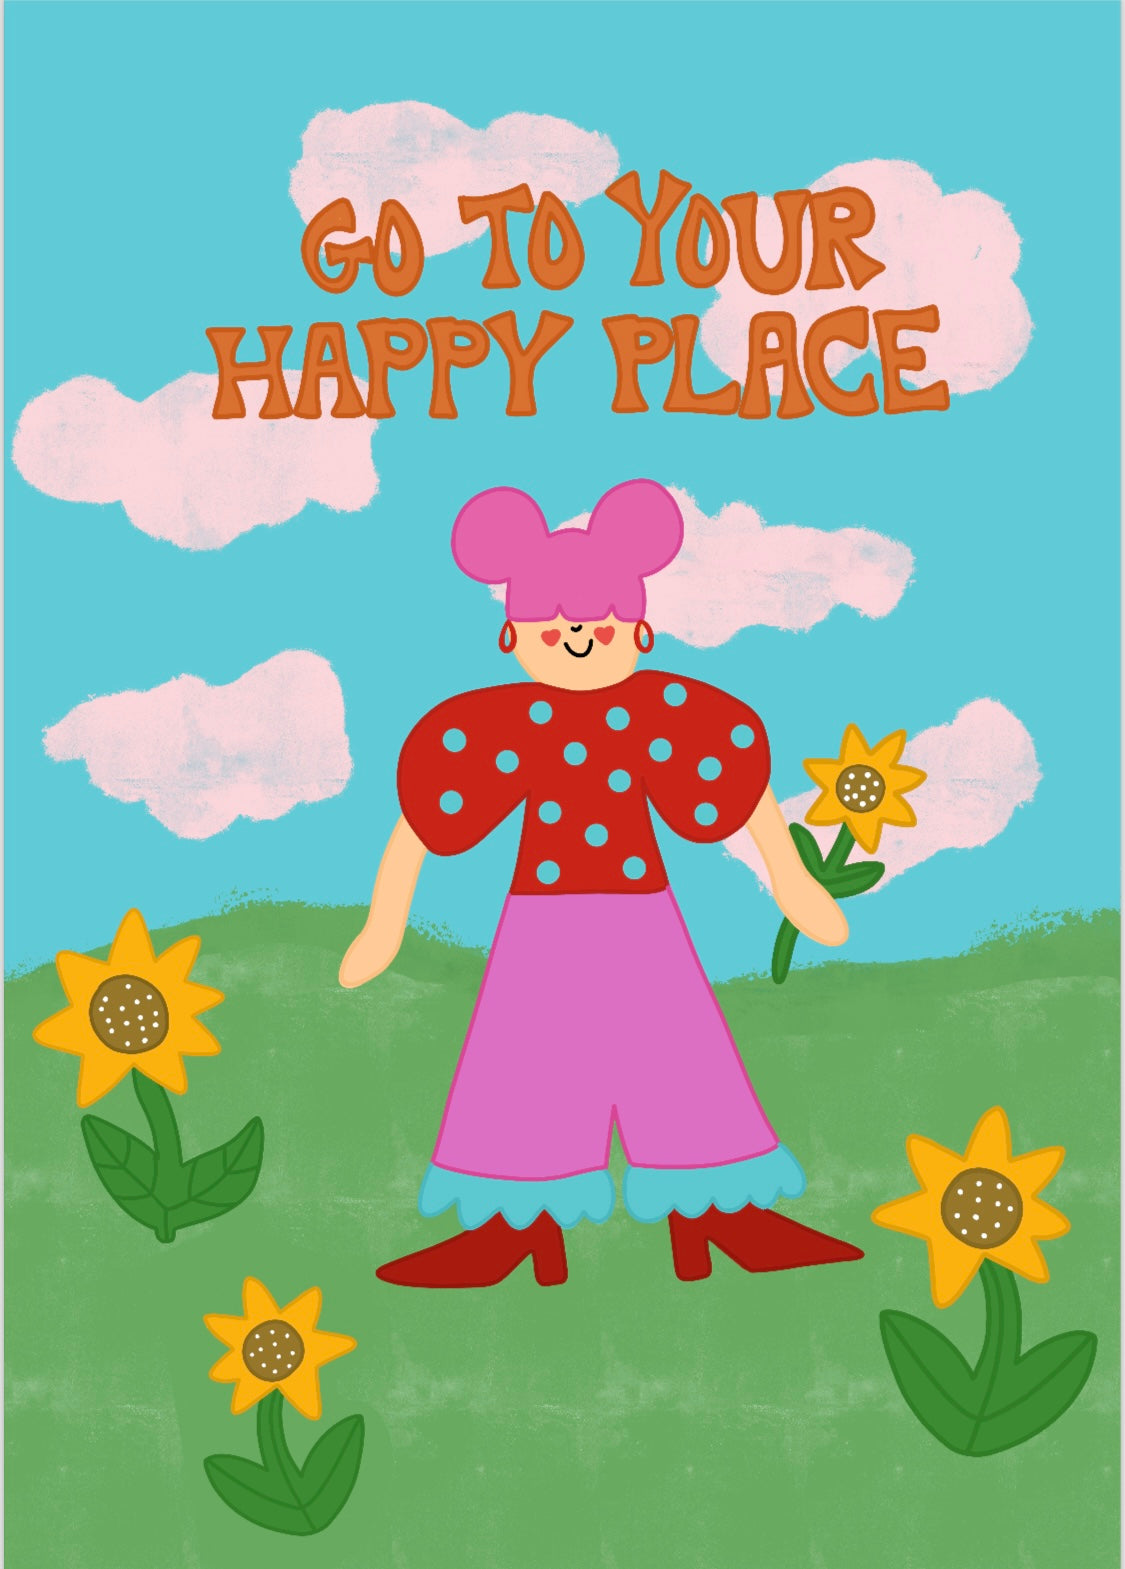 Happy place poster